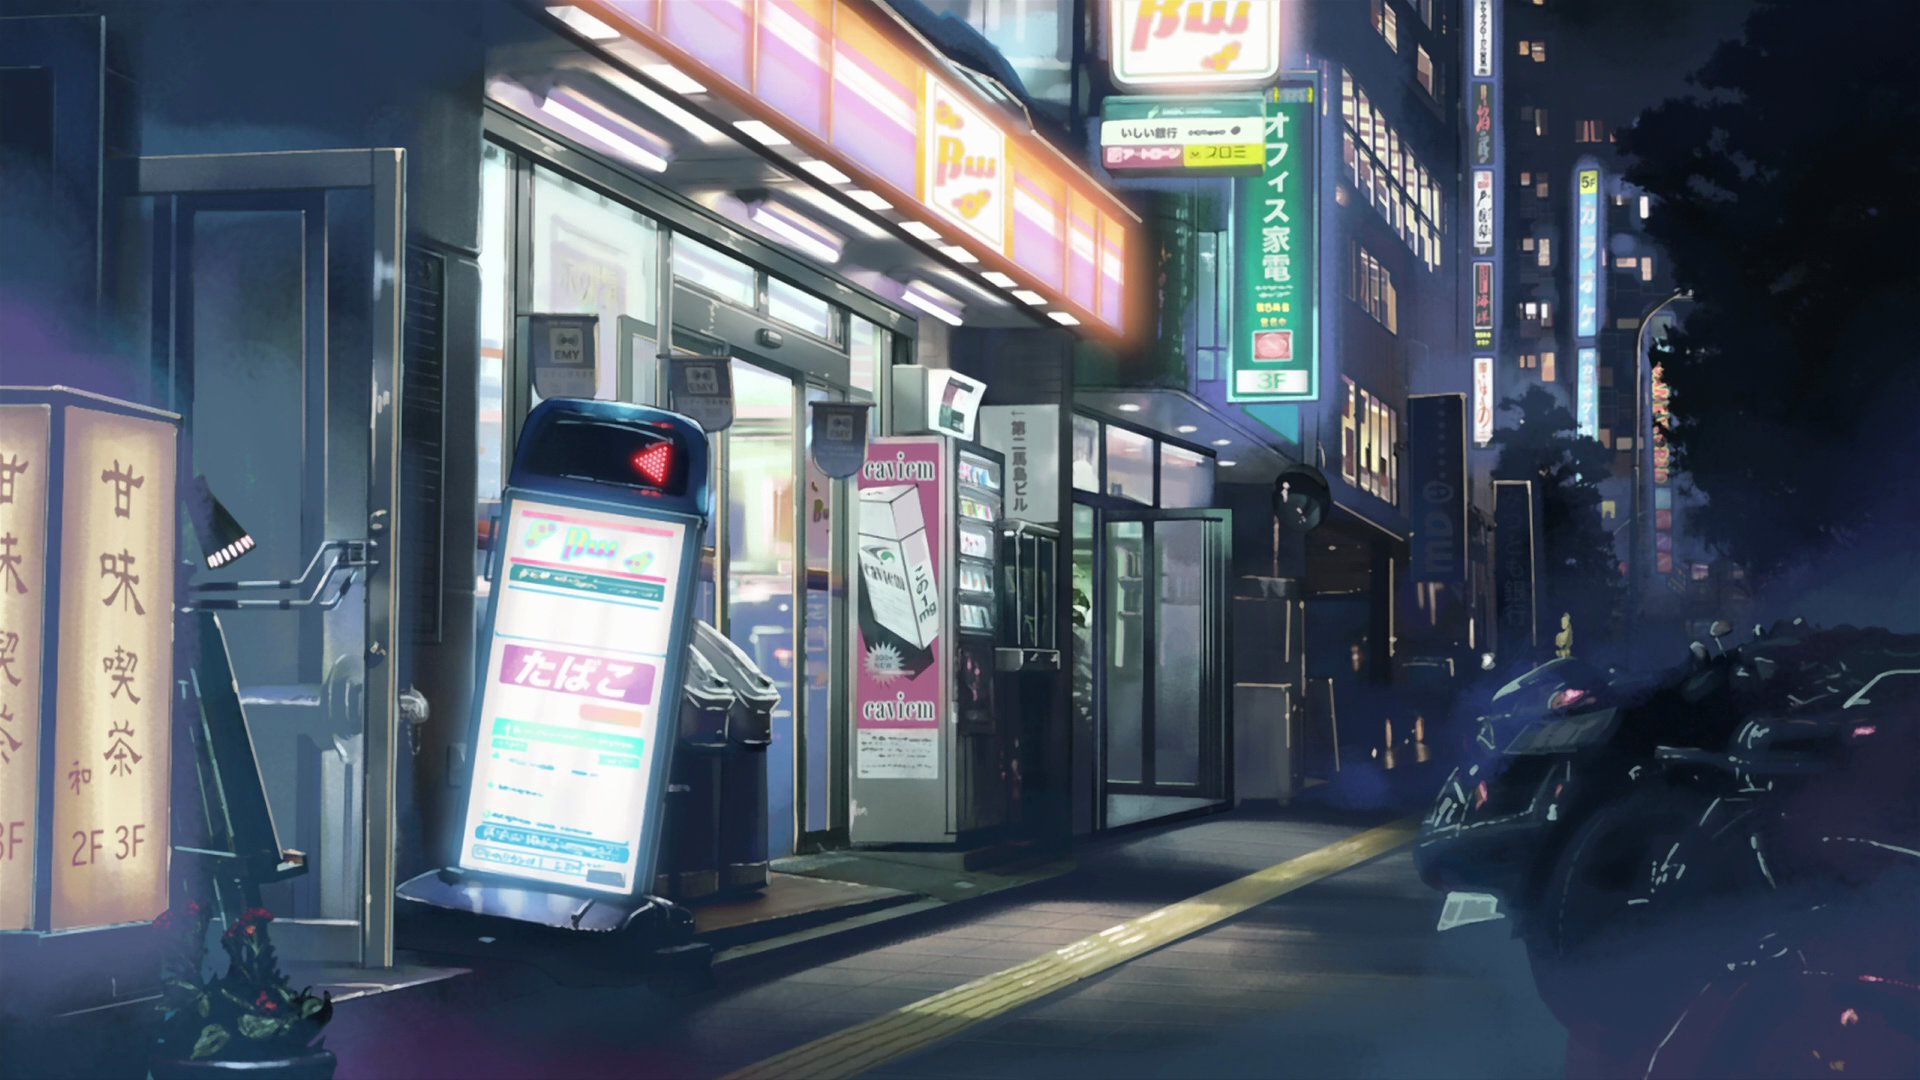 Anime 5 Centimeters Per Second HD Wallpaper Background Image.